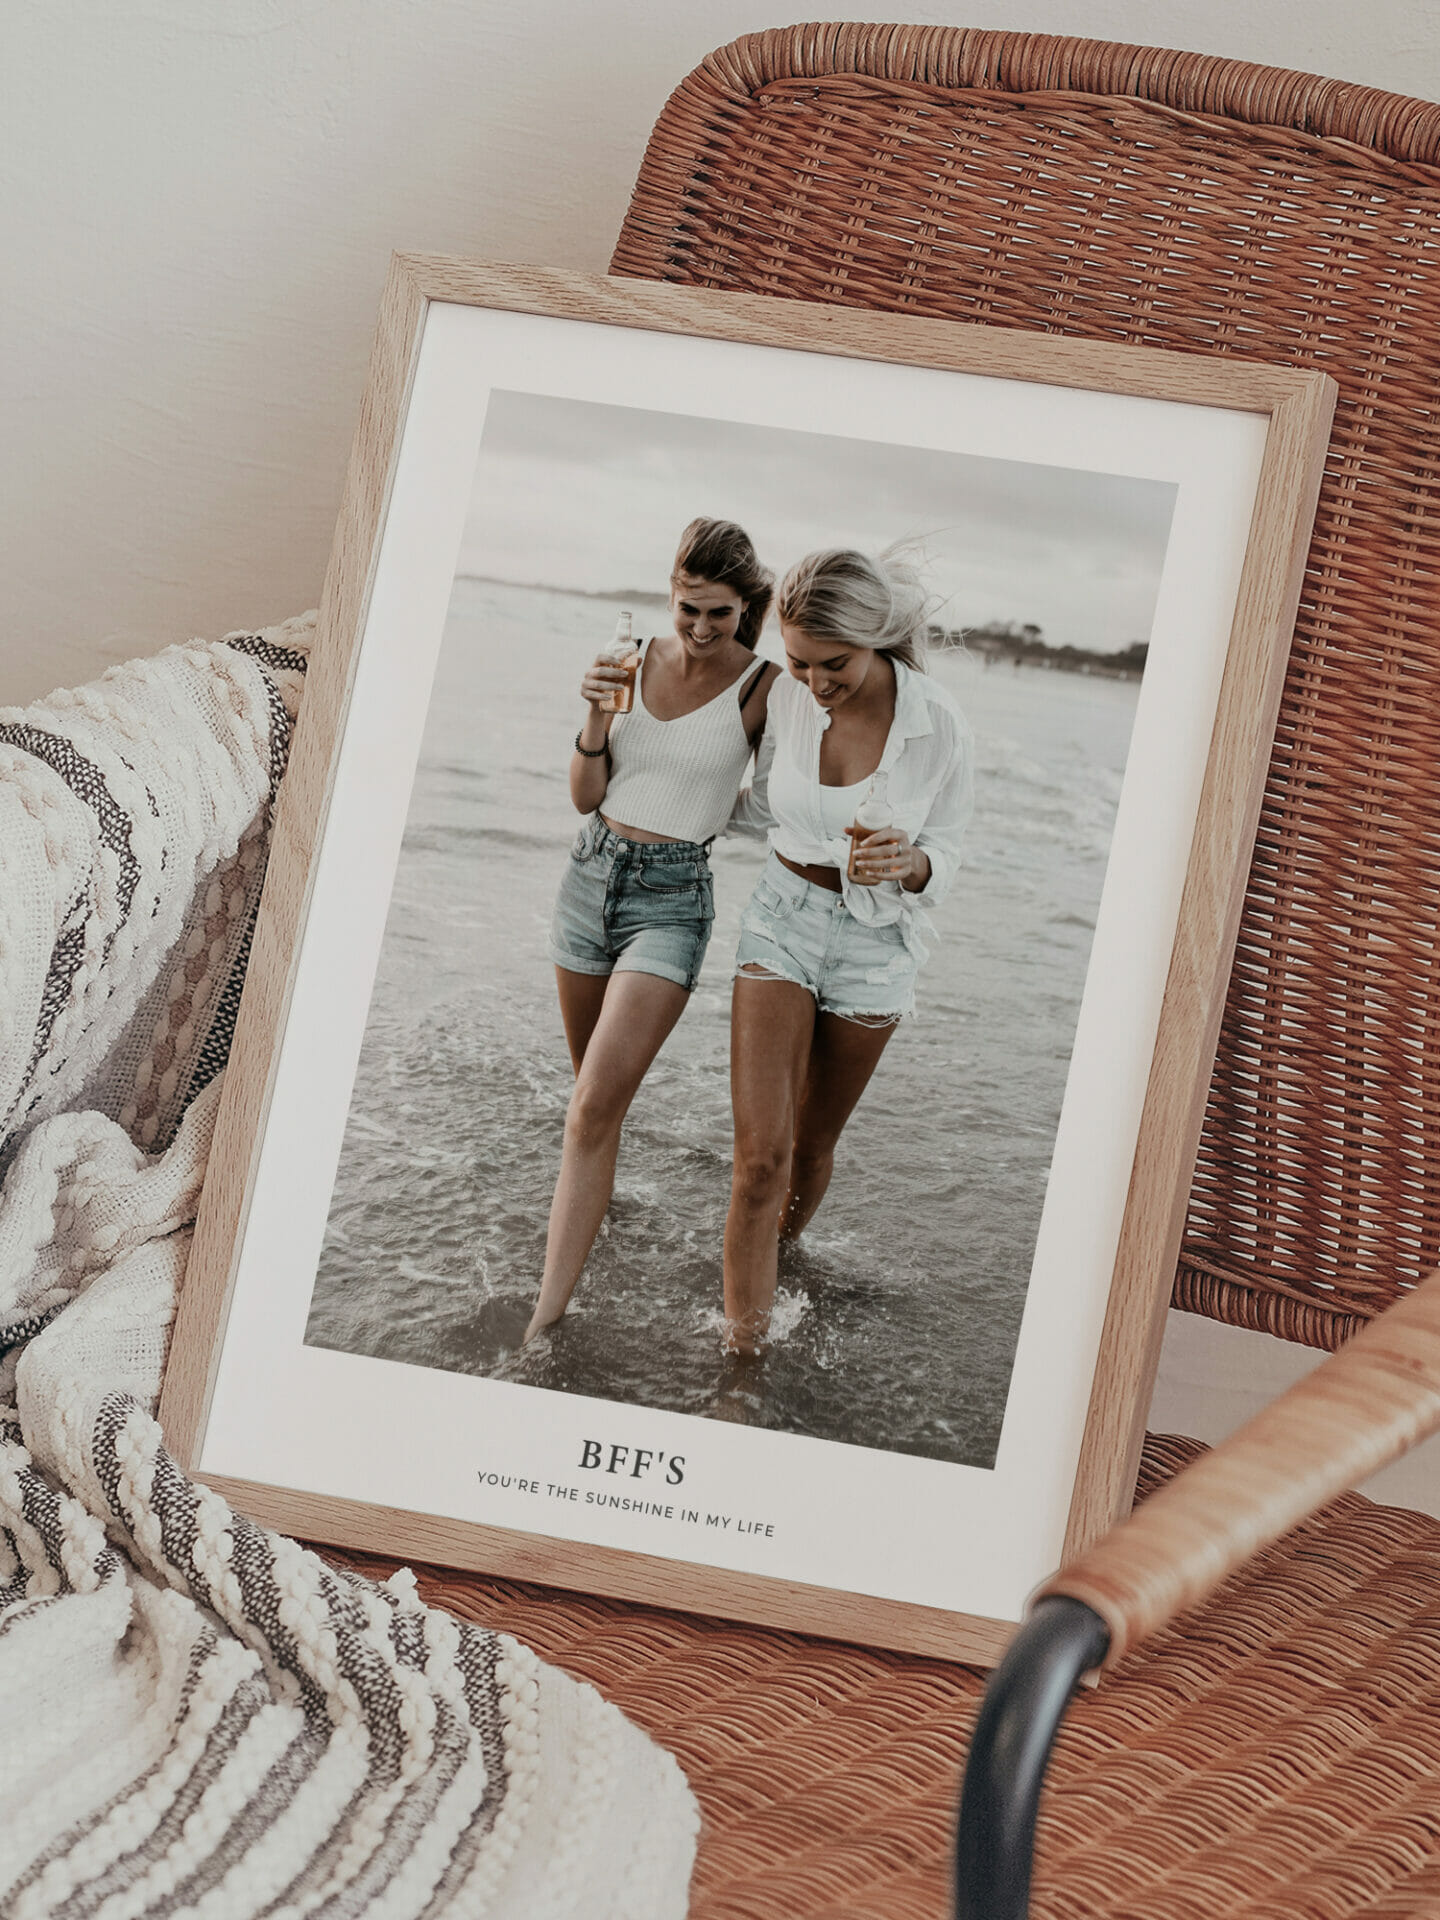 Interior with frames posters showing two best friends walking on the beach together